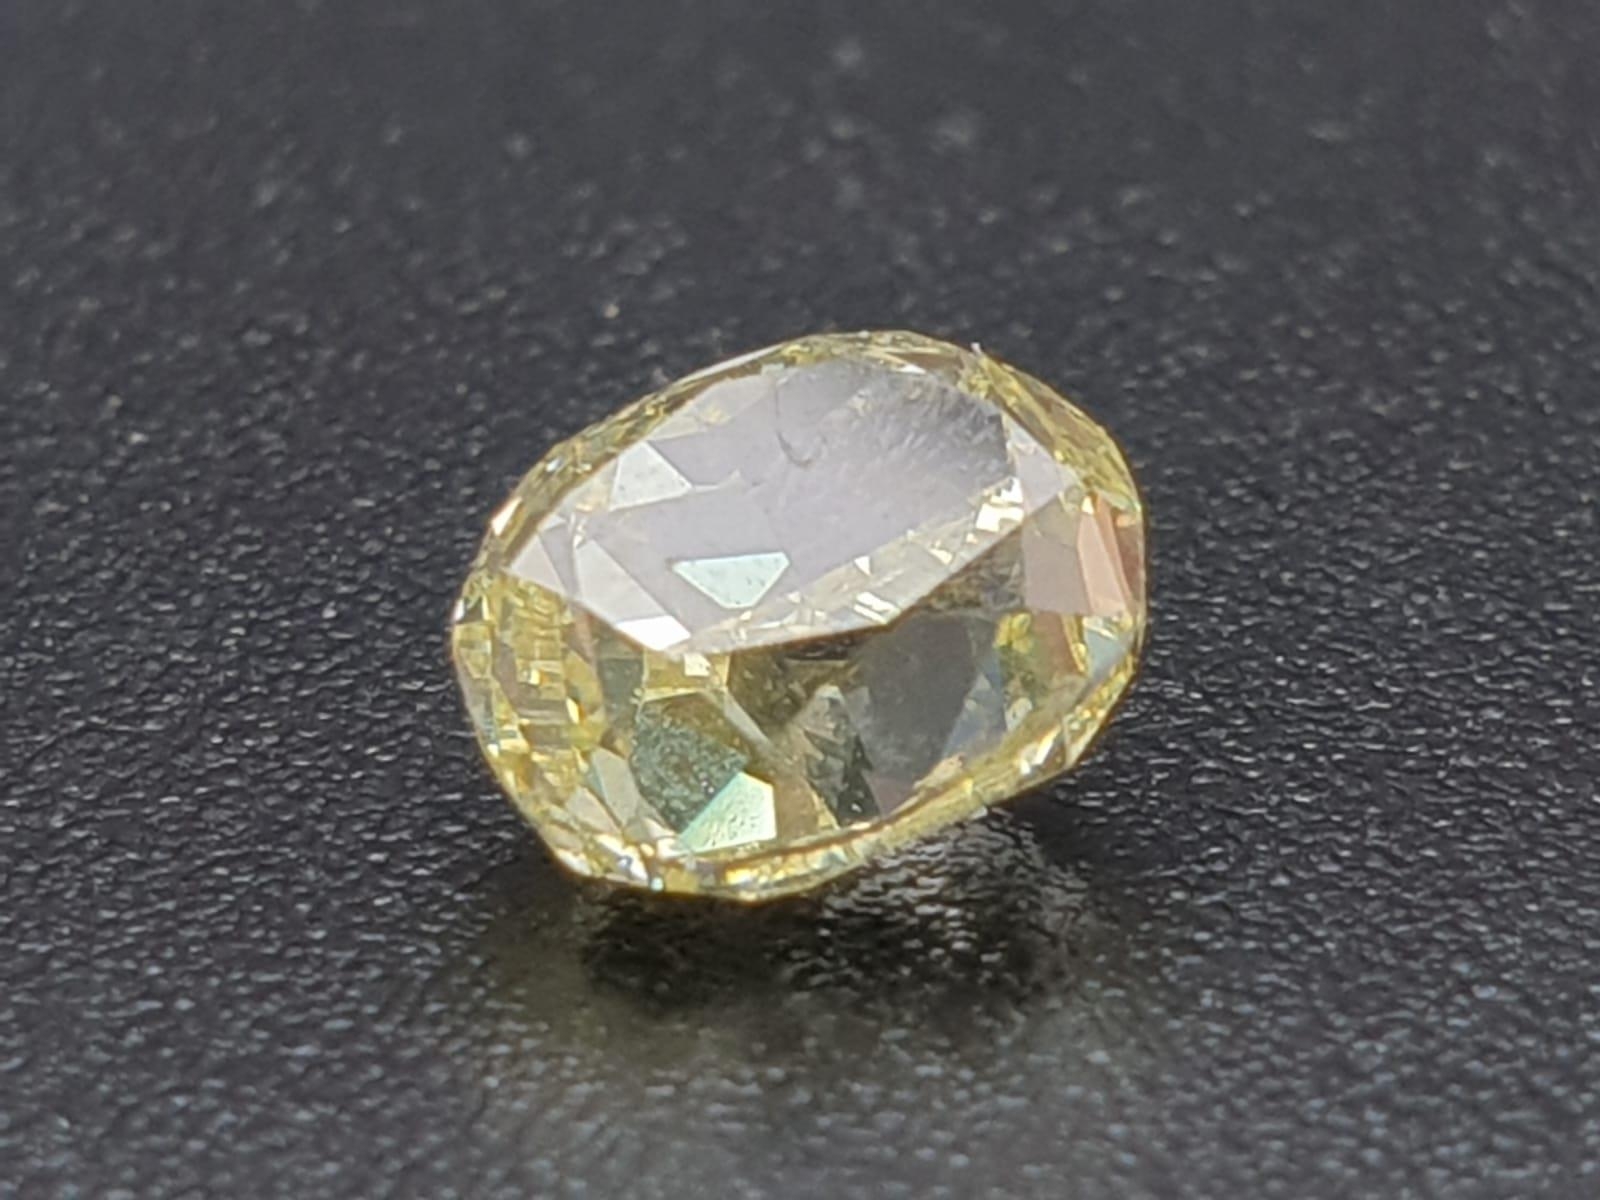 LOOSE DIAMOND OVAL MODIFIED BRIILLAINT GIA 7141606225 1CT NATURAL FANCY YELLOW EVEN DISTRIBUTION VS1 - Image 2 of 5